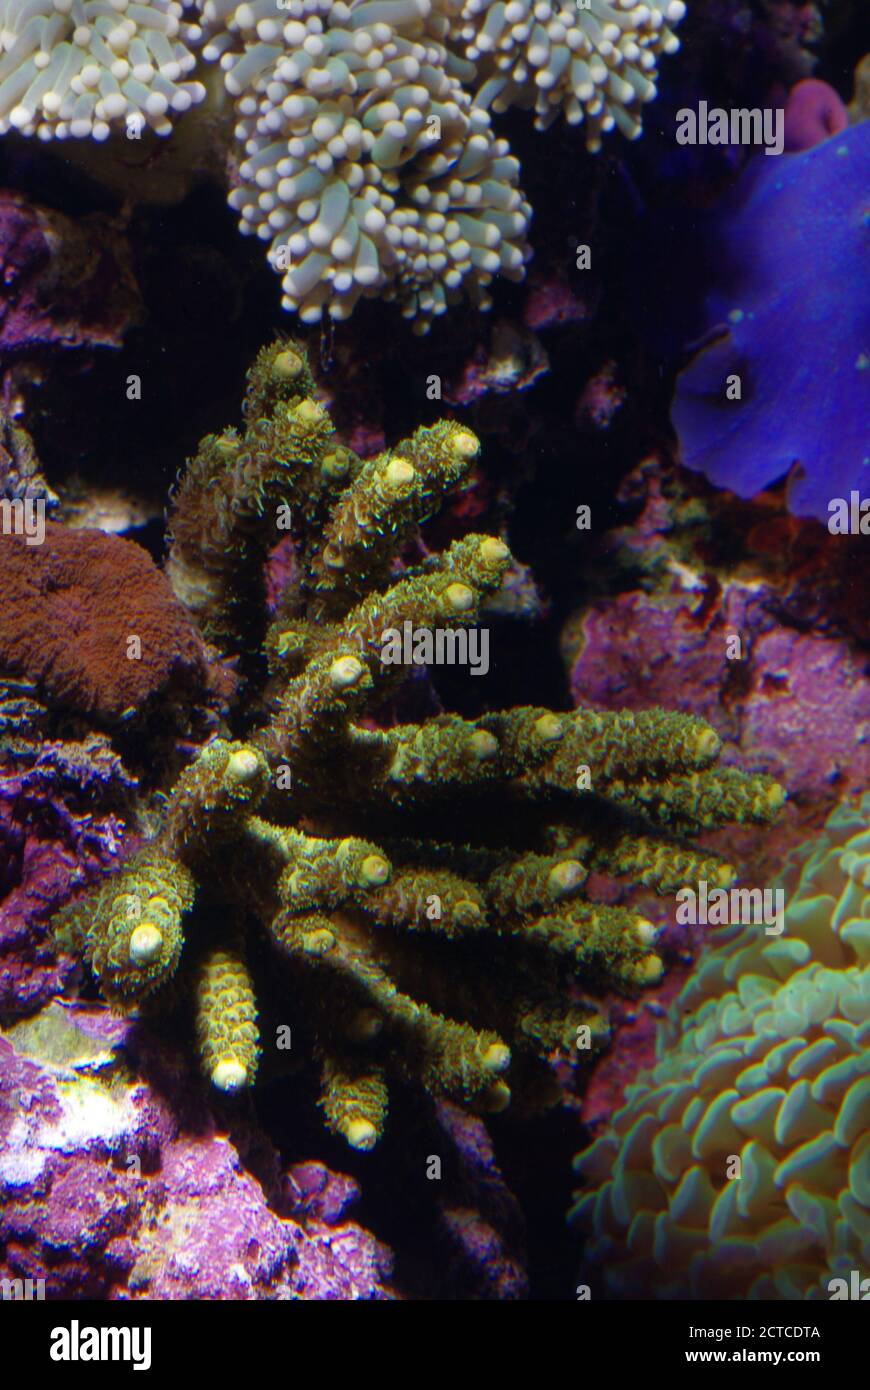 Staghorn stony coral, Acropora sp. Stock Photo